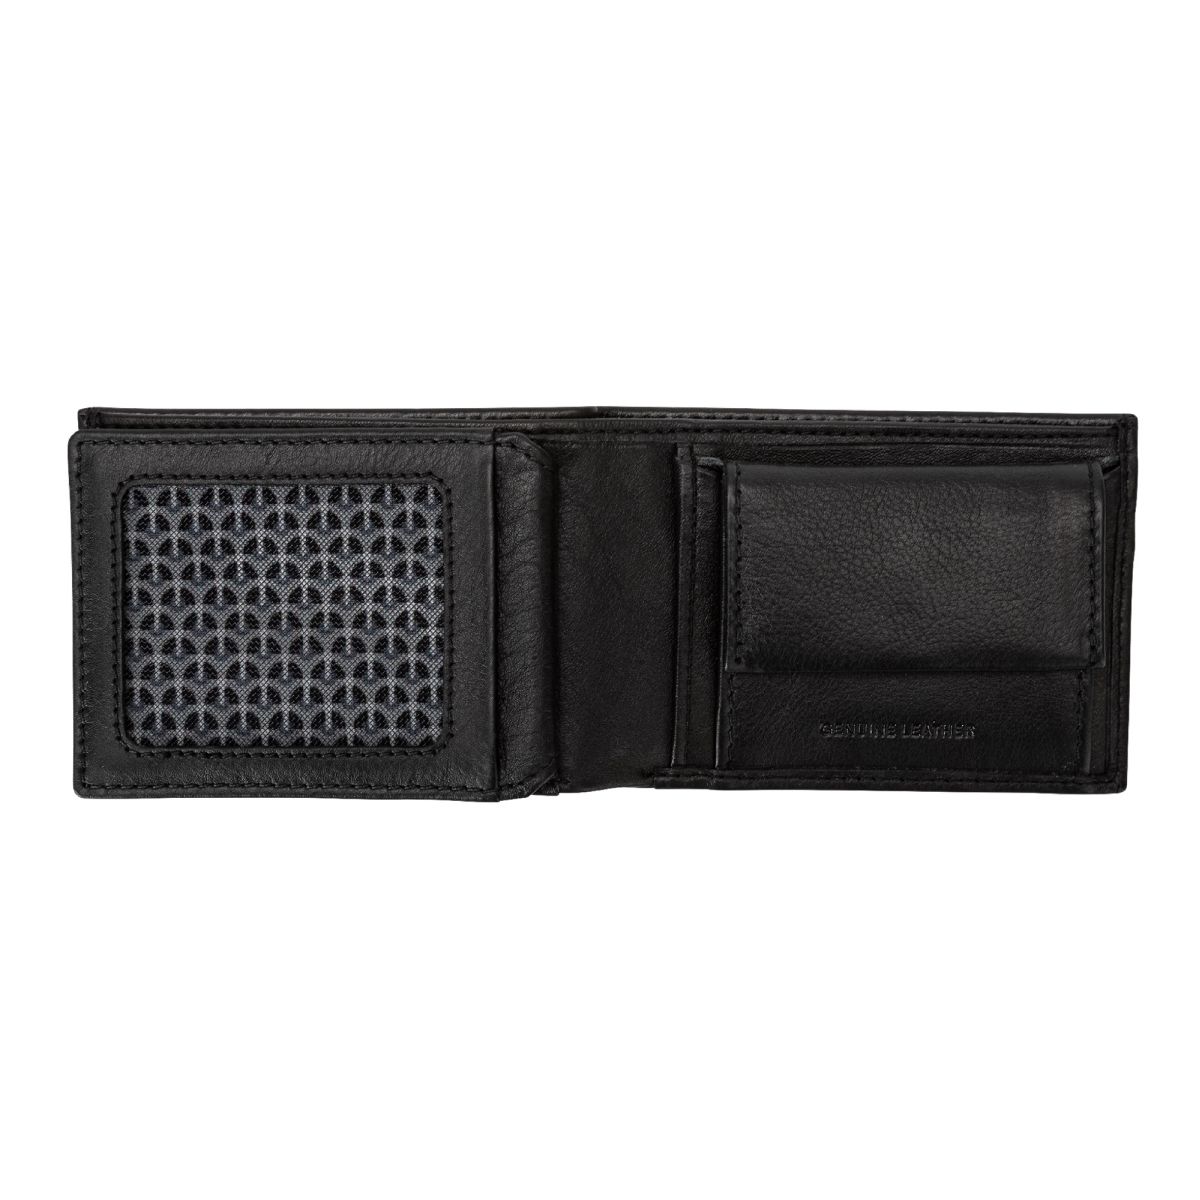 Small mens minimalist wallet with coins pocket - Black